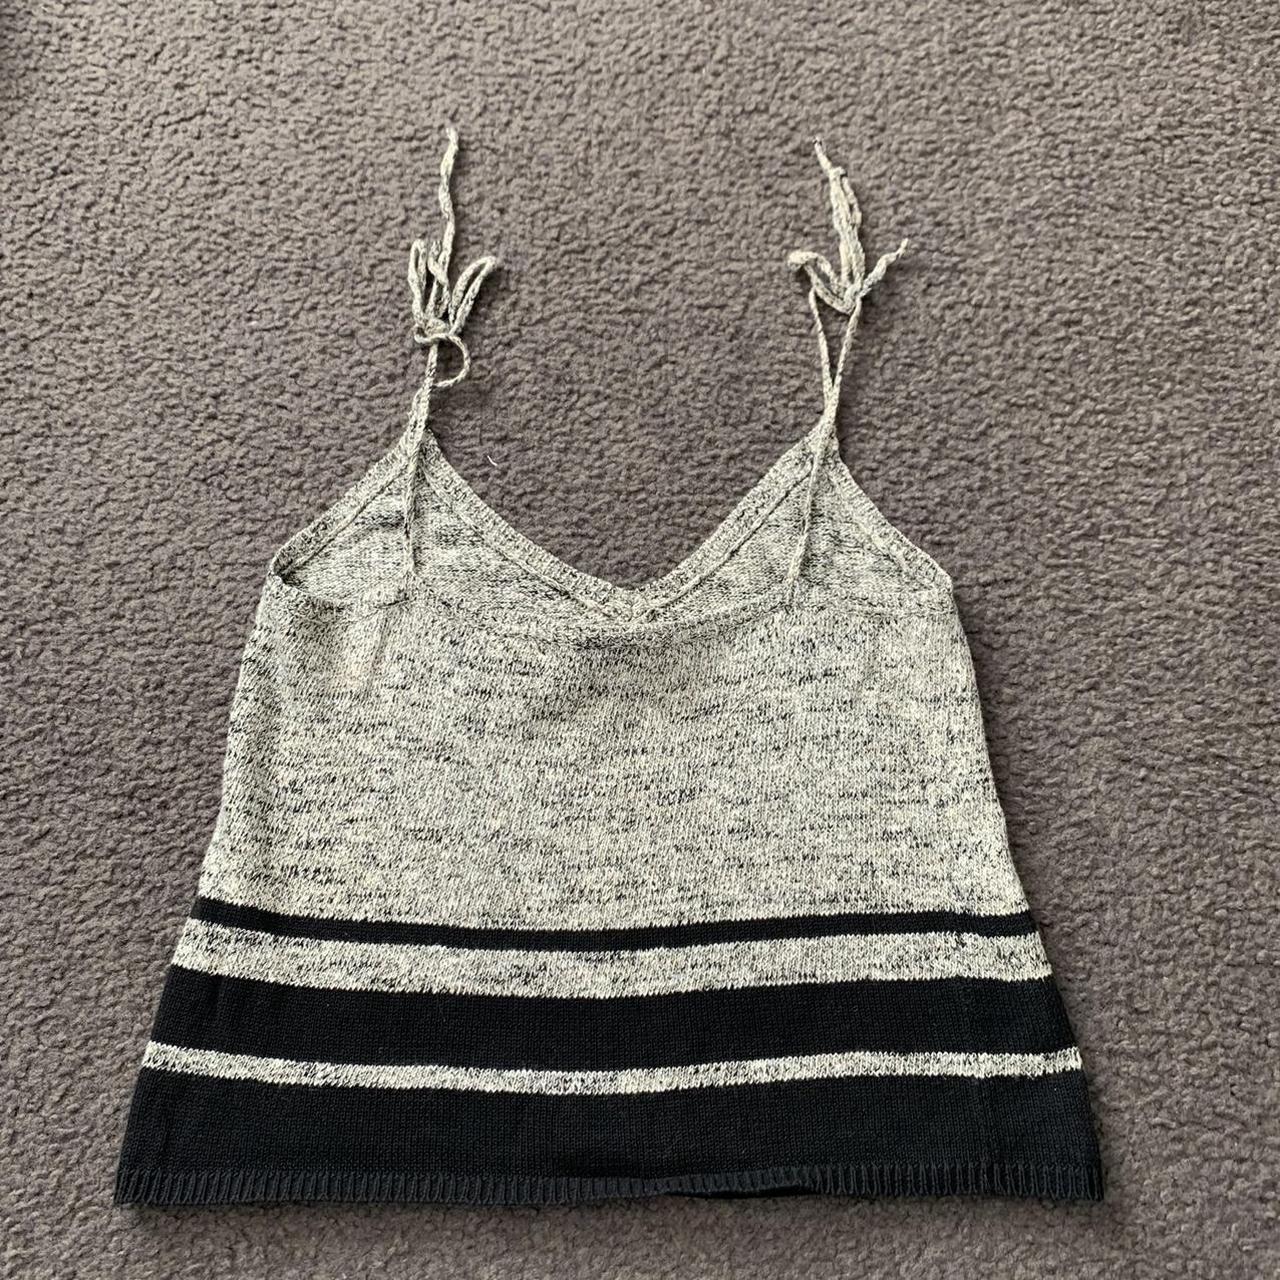 Product Image 3 - 🖤 Knit Crop Top 🖤

Size